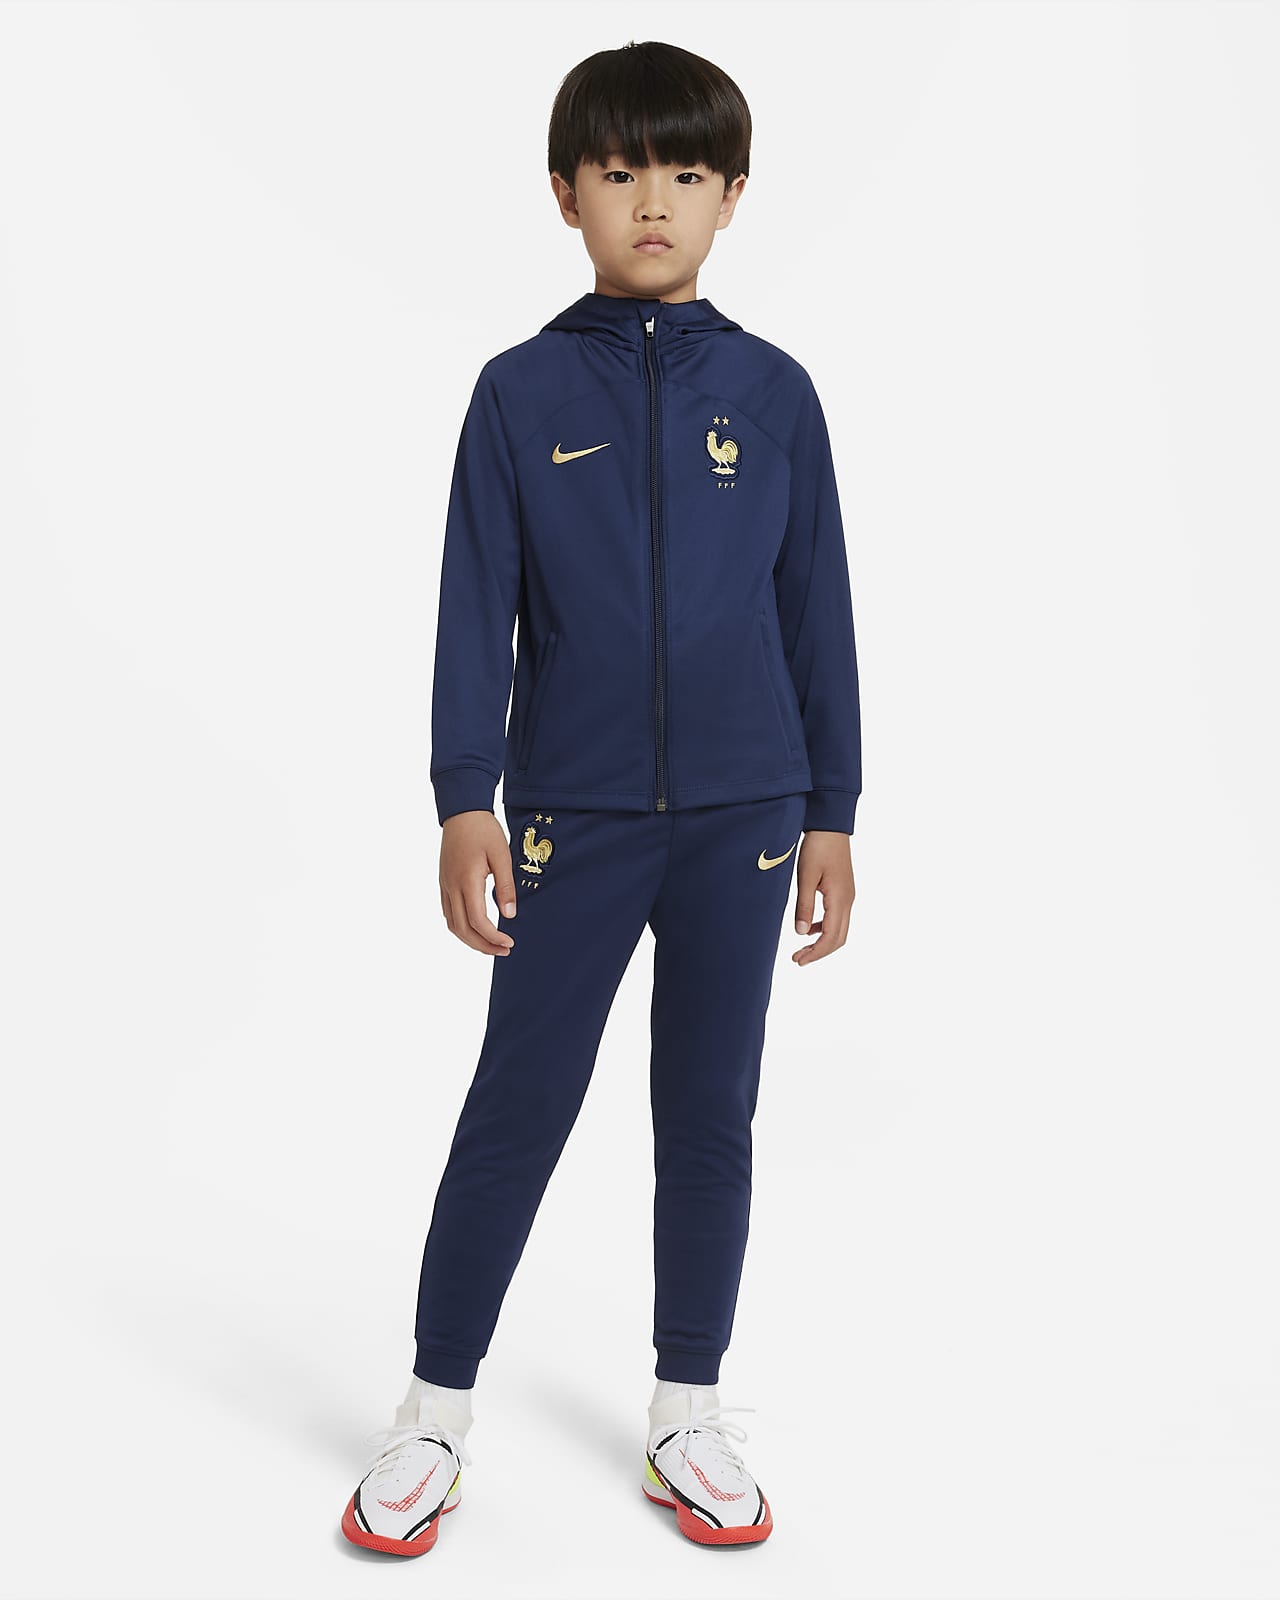 FFF Strike Younger Kids' Nike Dri-FIT Hooded Football Tracksuit. Nike BE